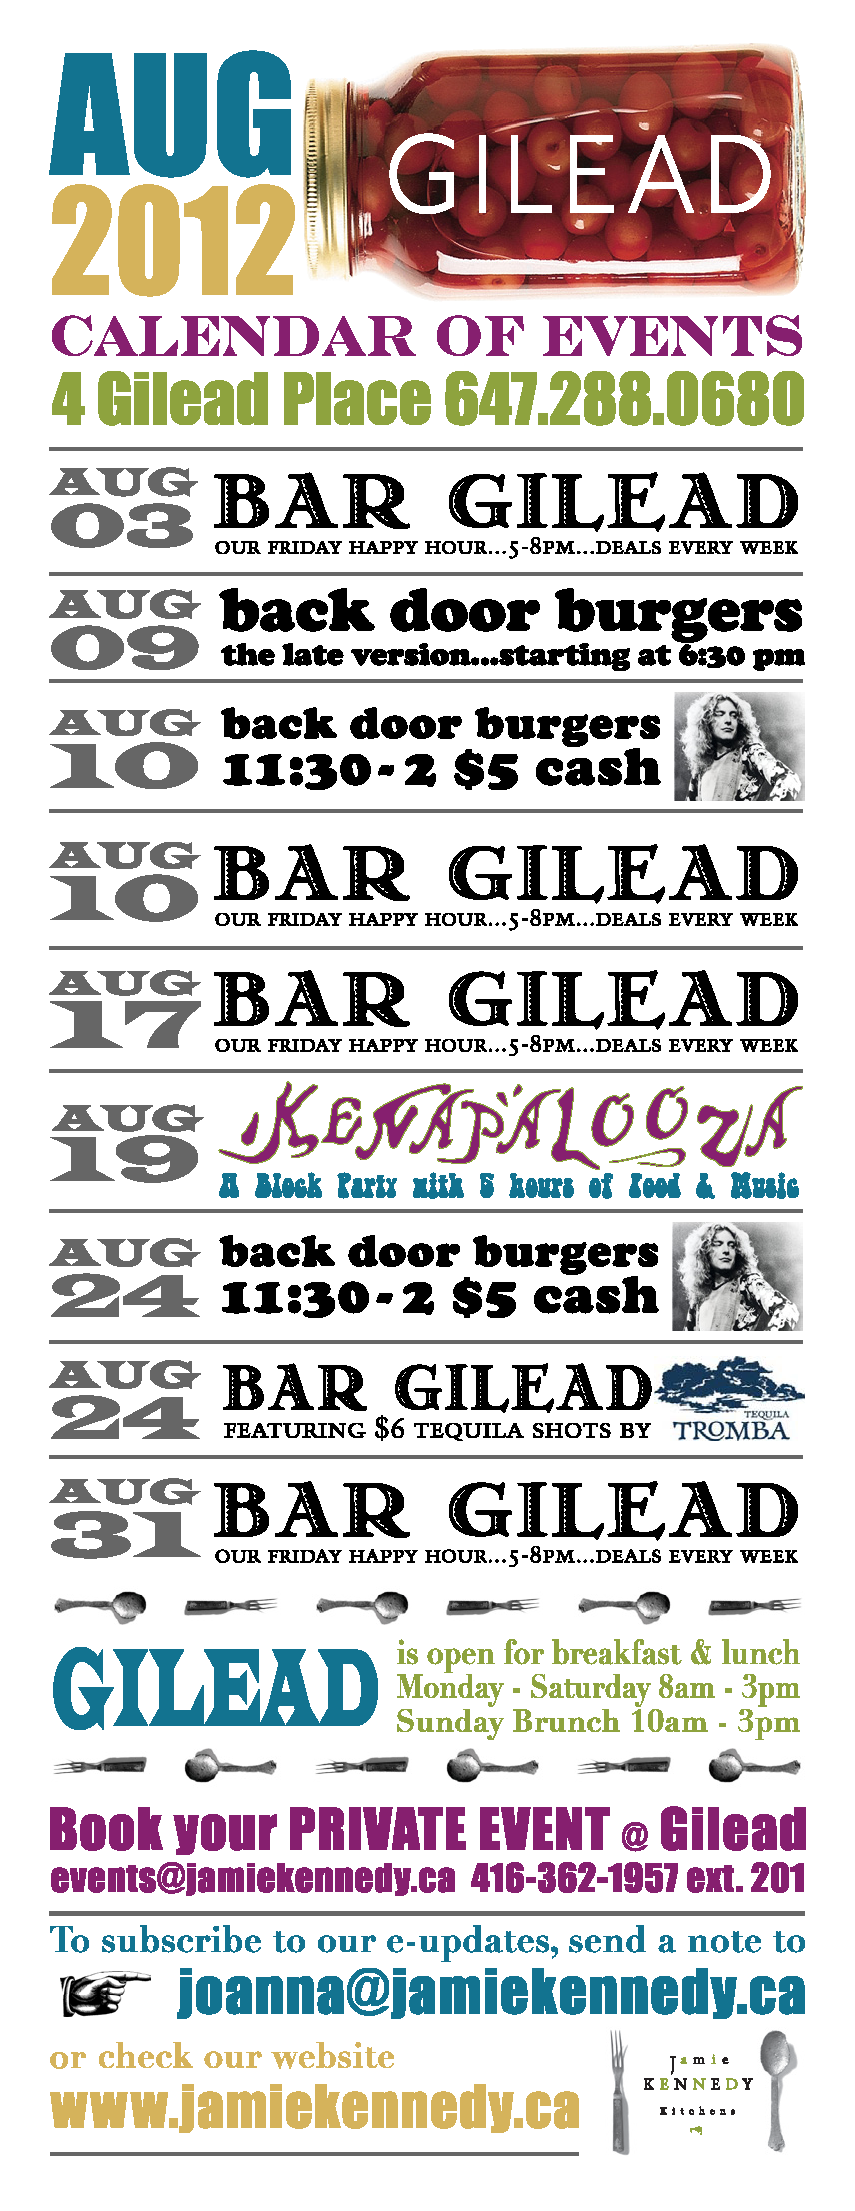 Jamie Kennedy’s August Events at Gilead